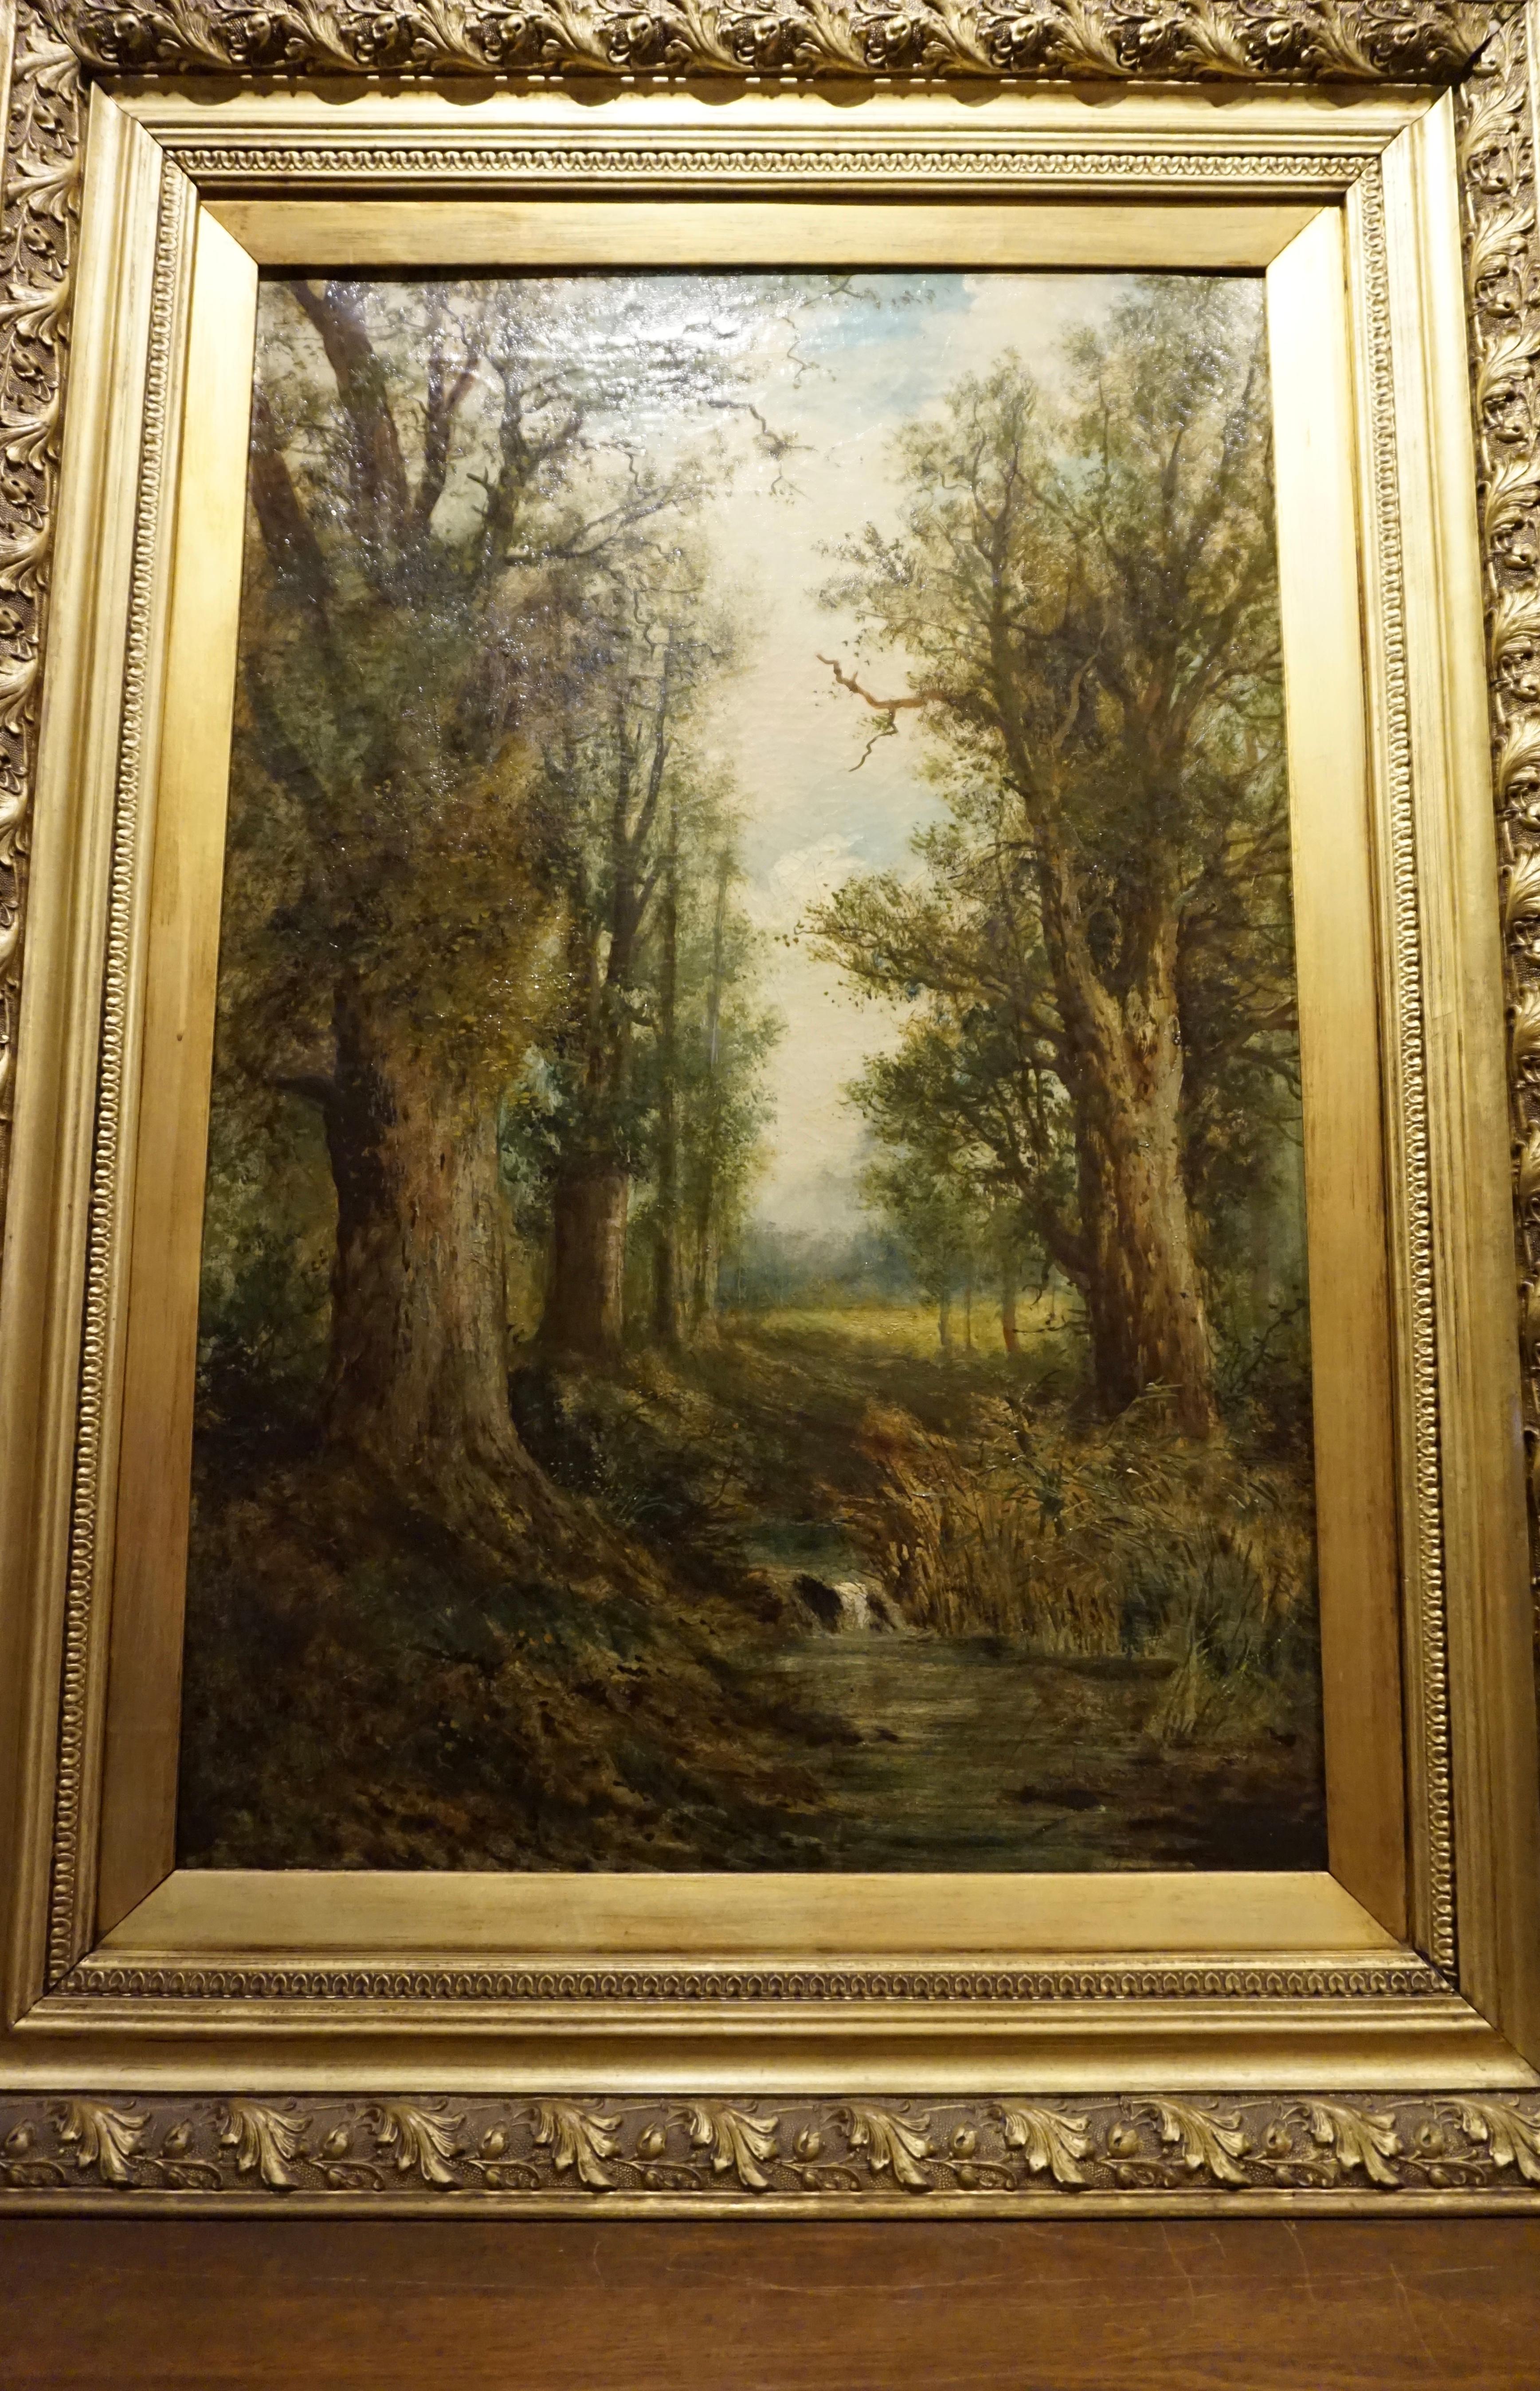 Late 19th Century English School Large Oil on Canvas Painting in Original Frame In Good Condition For Sale In Vancouver, British Columbia